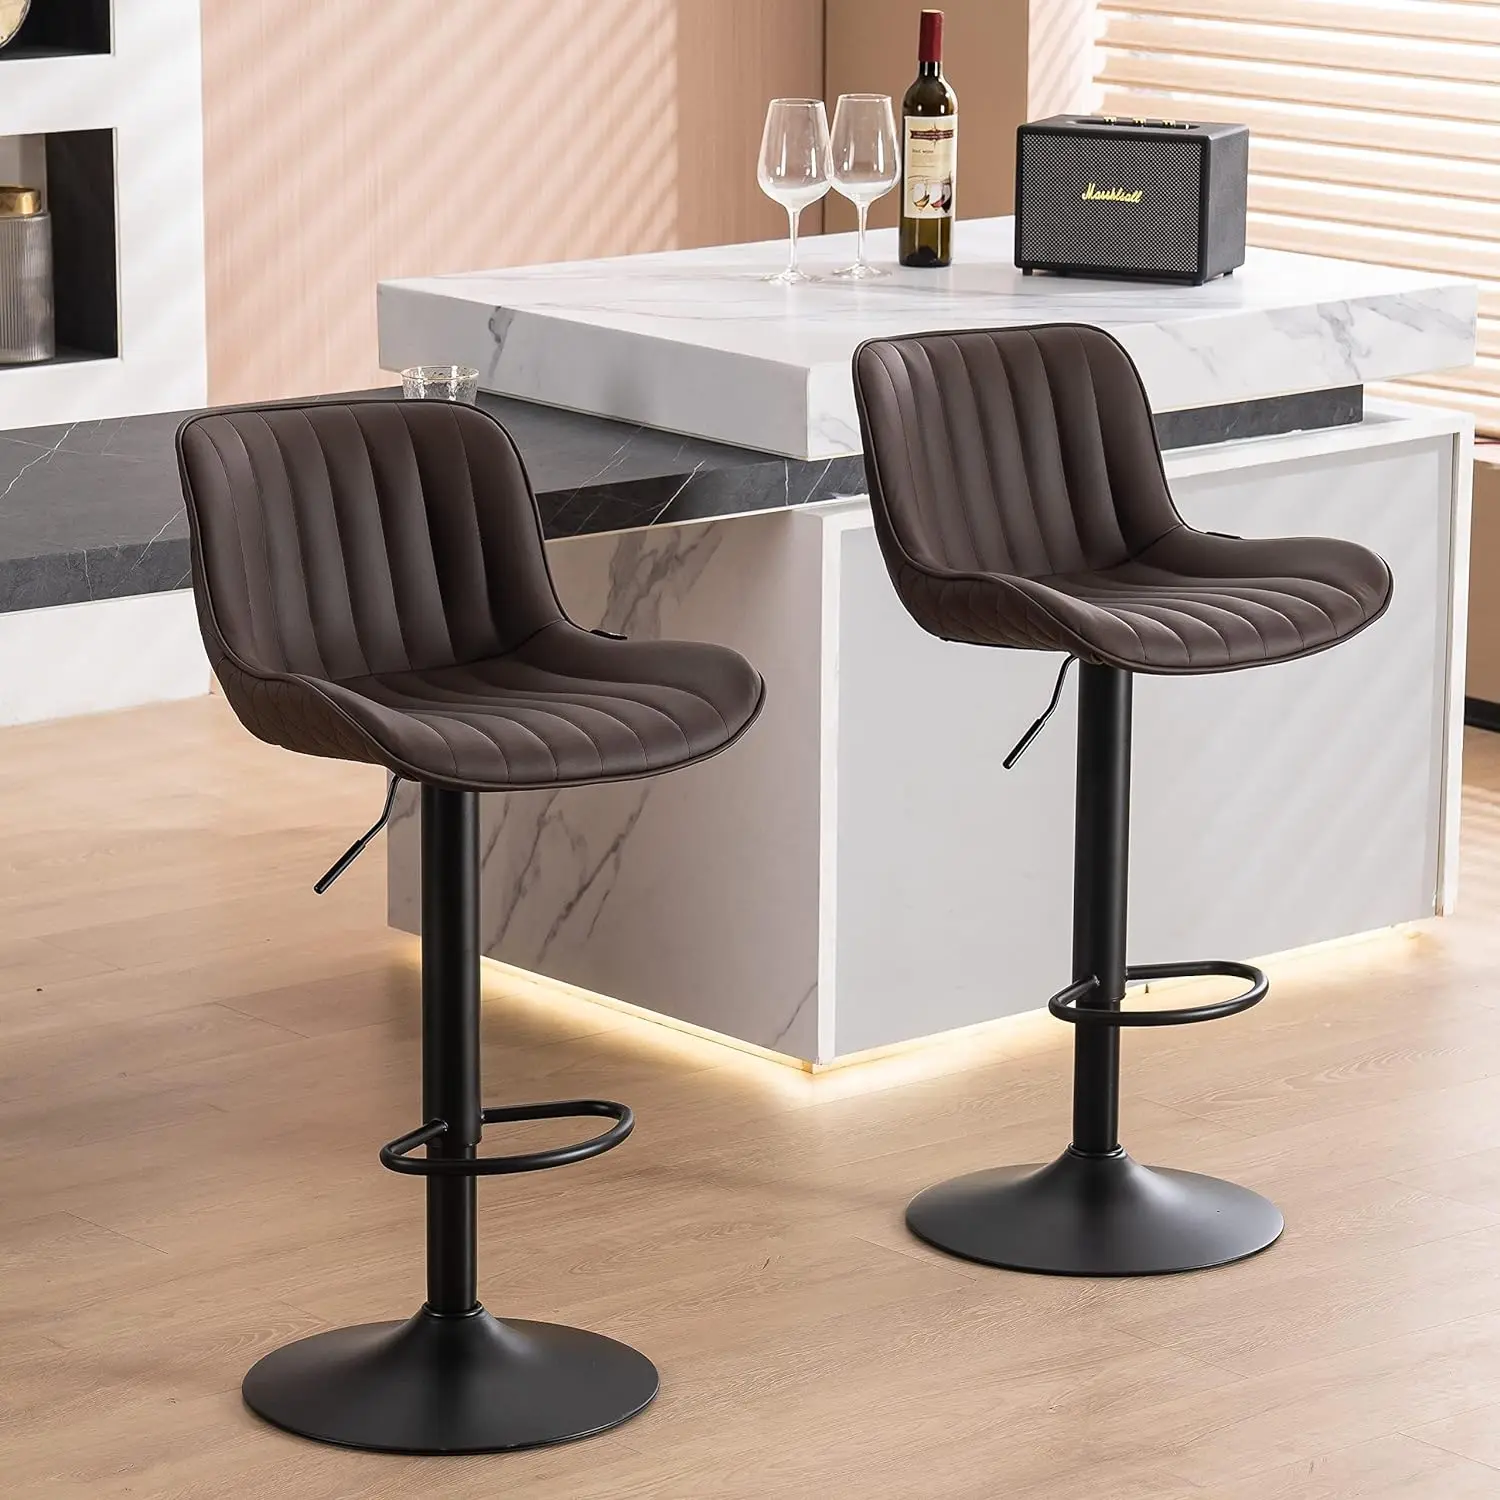 

Brown Upholstered Bar Stools Set of 2 Counter Height Modern Adjustable Swivel Bar Chairs with Backs Mid Century PU Leather